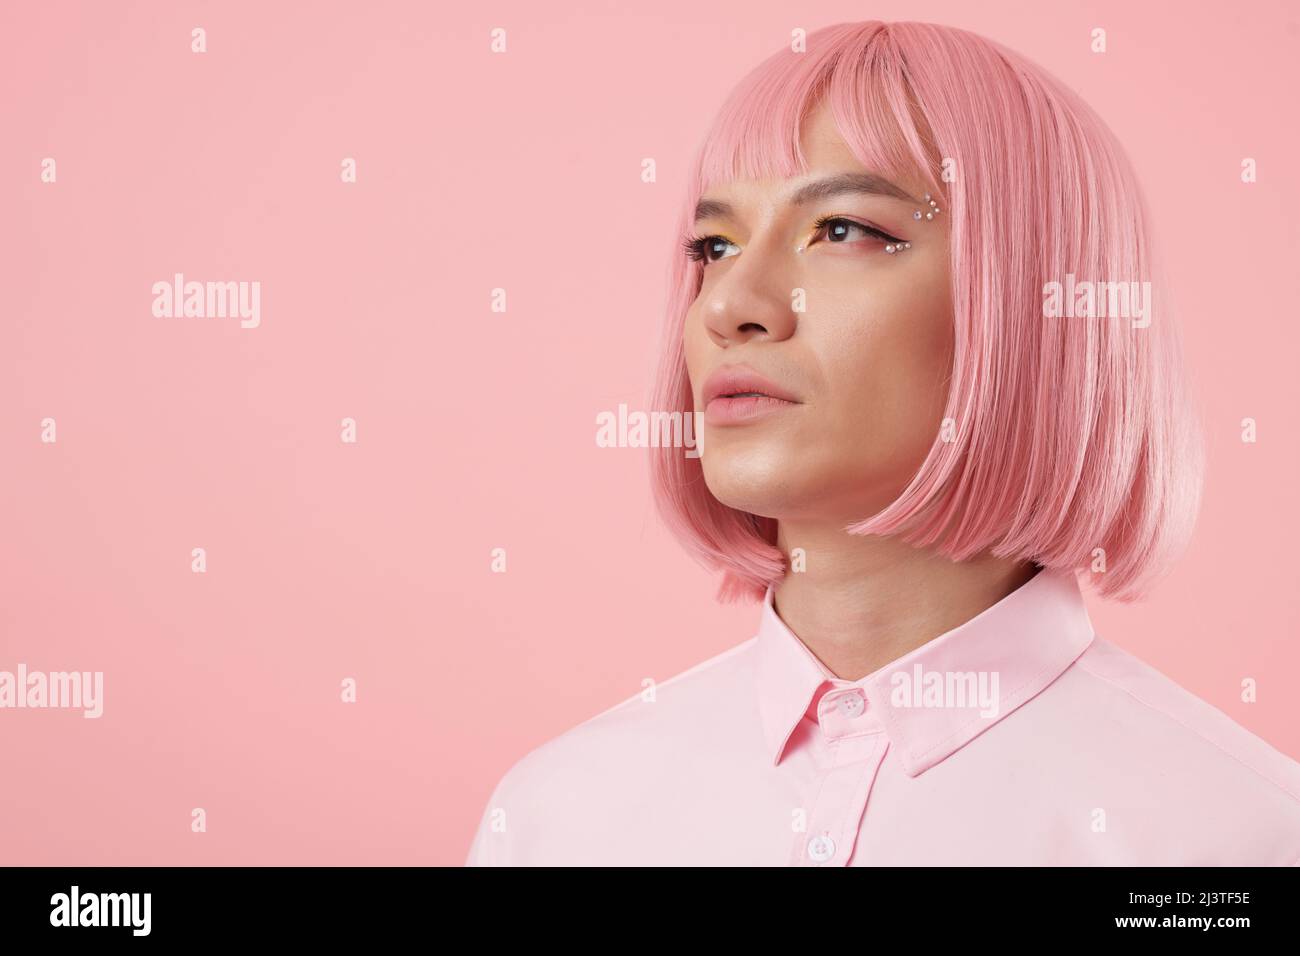 Portrait of young man with glam rhinestone makeup wearing pink bob wig Stock Photo